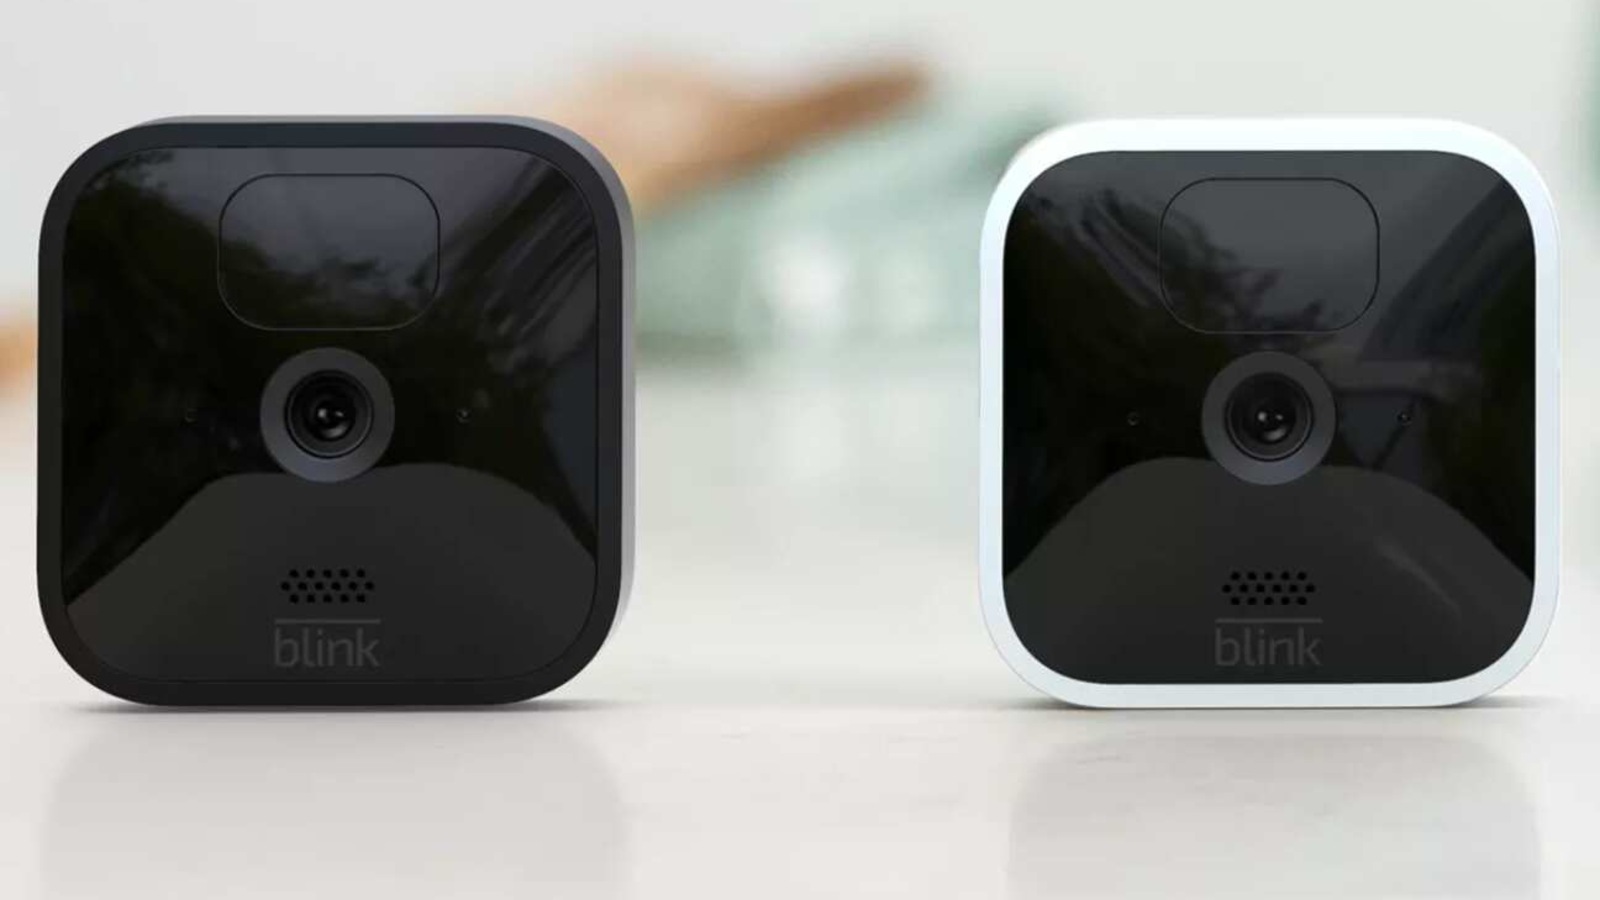 s indoor, outdoor Blink cameras can work for 4 years on one